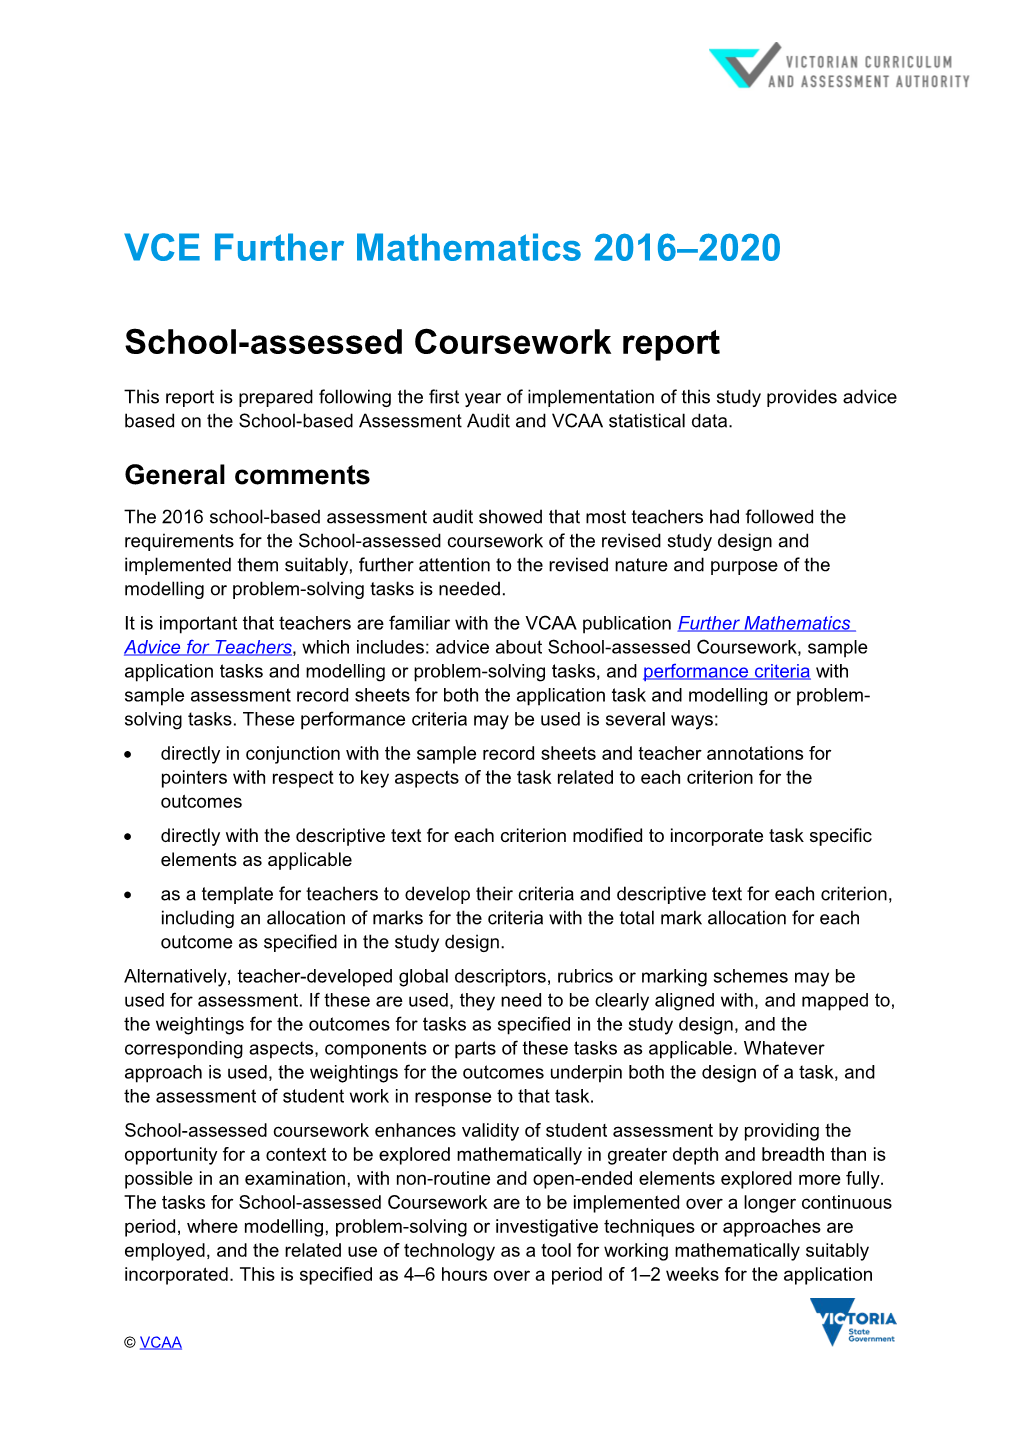 Further Mathematics 2016 - 2020 School-Assessed Coursework Report